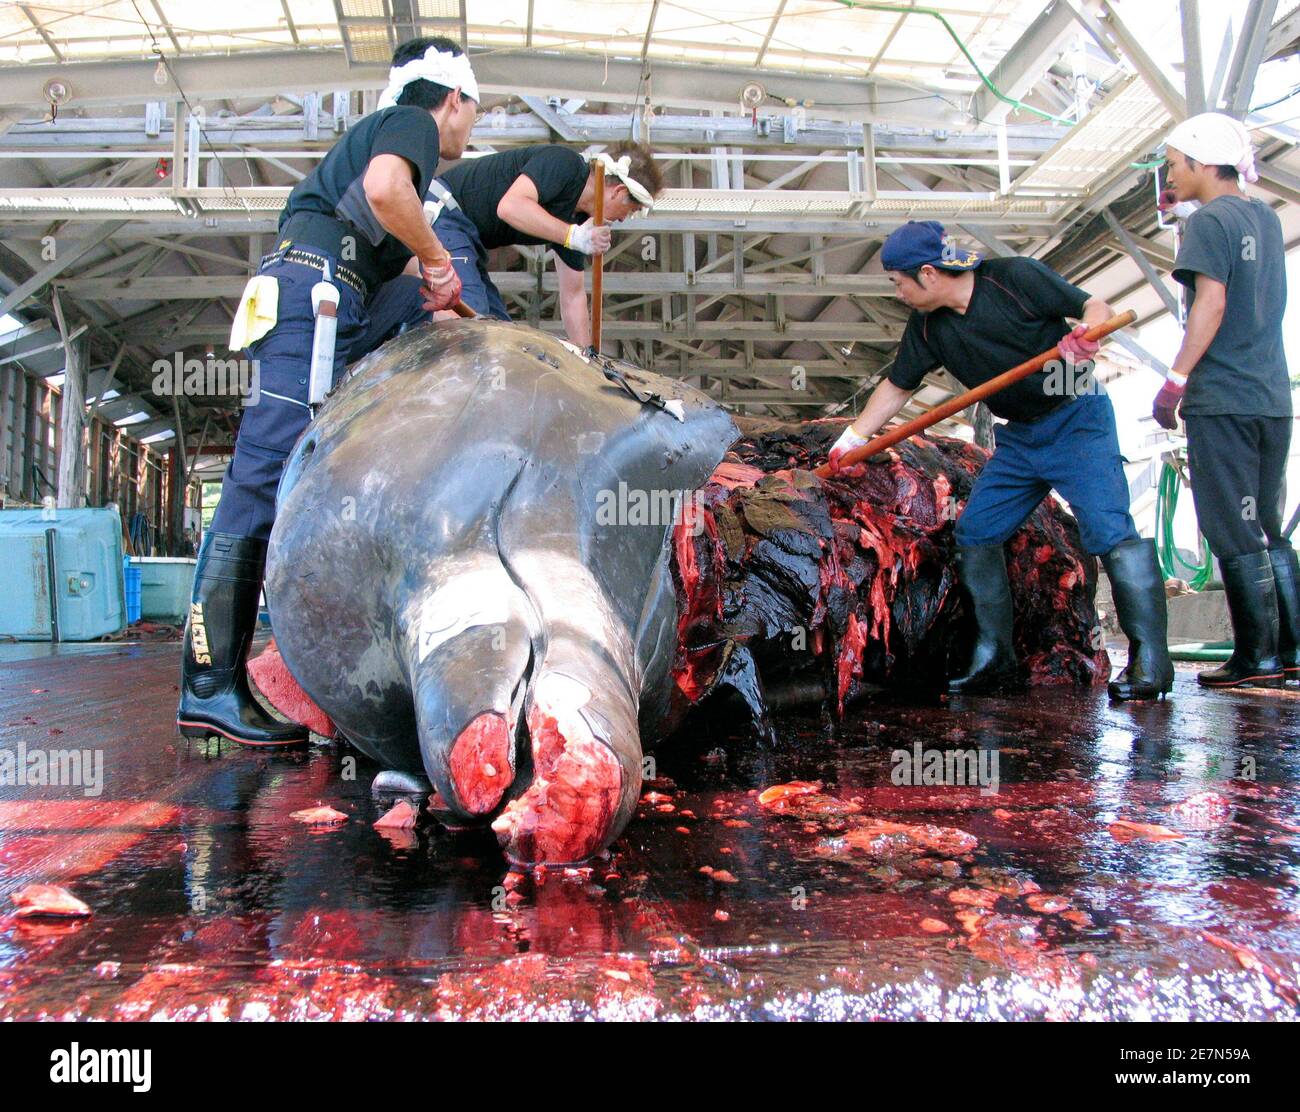 Workers butcher a 10-tonne (11-ton) Baird's Beaked Whale at Wada Port in Chiba Prefecture, Japan June 21, 2007. Japan last month threatened to quit the International Whaling Commission (IWC) after opposition from anti-whaling nations at the group's annual meeting forced it to scrap a proposal to allow four coastal villages to kill minke whales. REUTERS/Olivier Fabre (JAPAN) Stock Photo